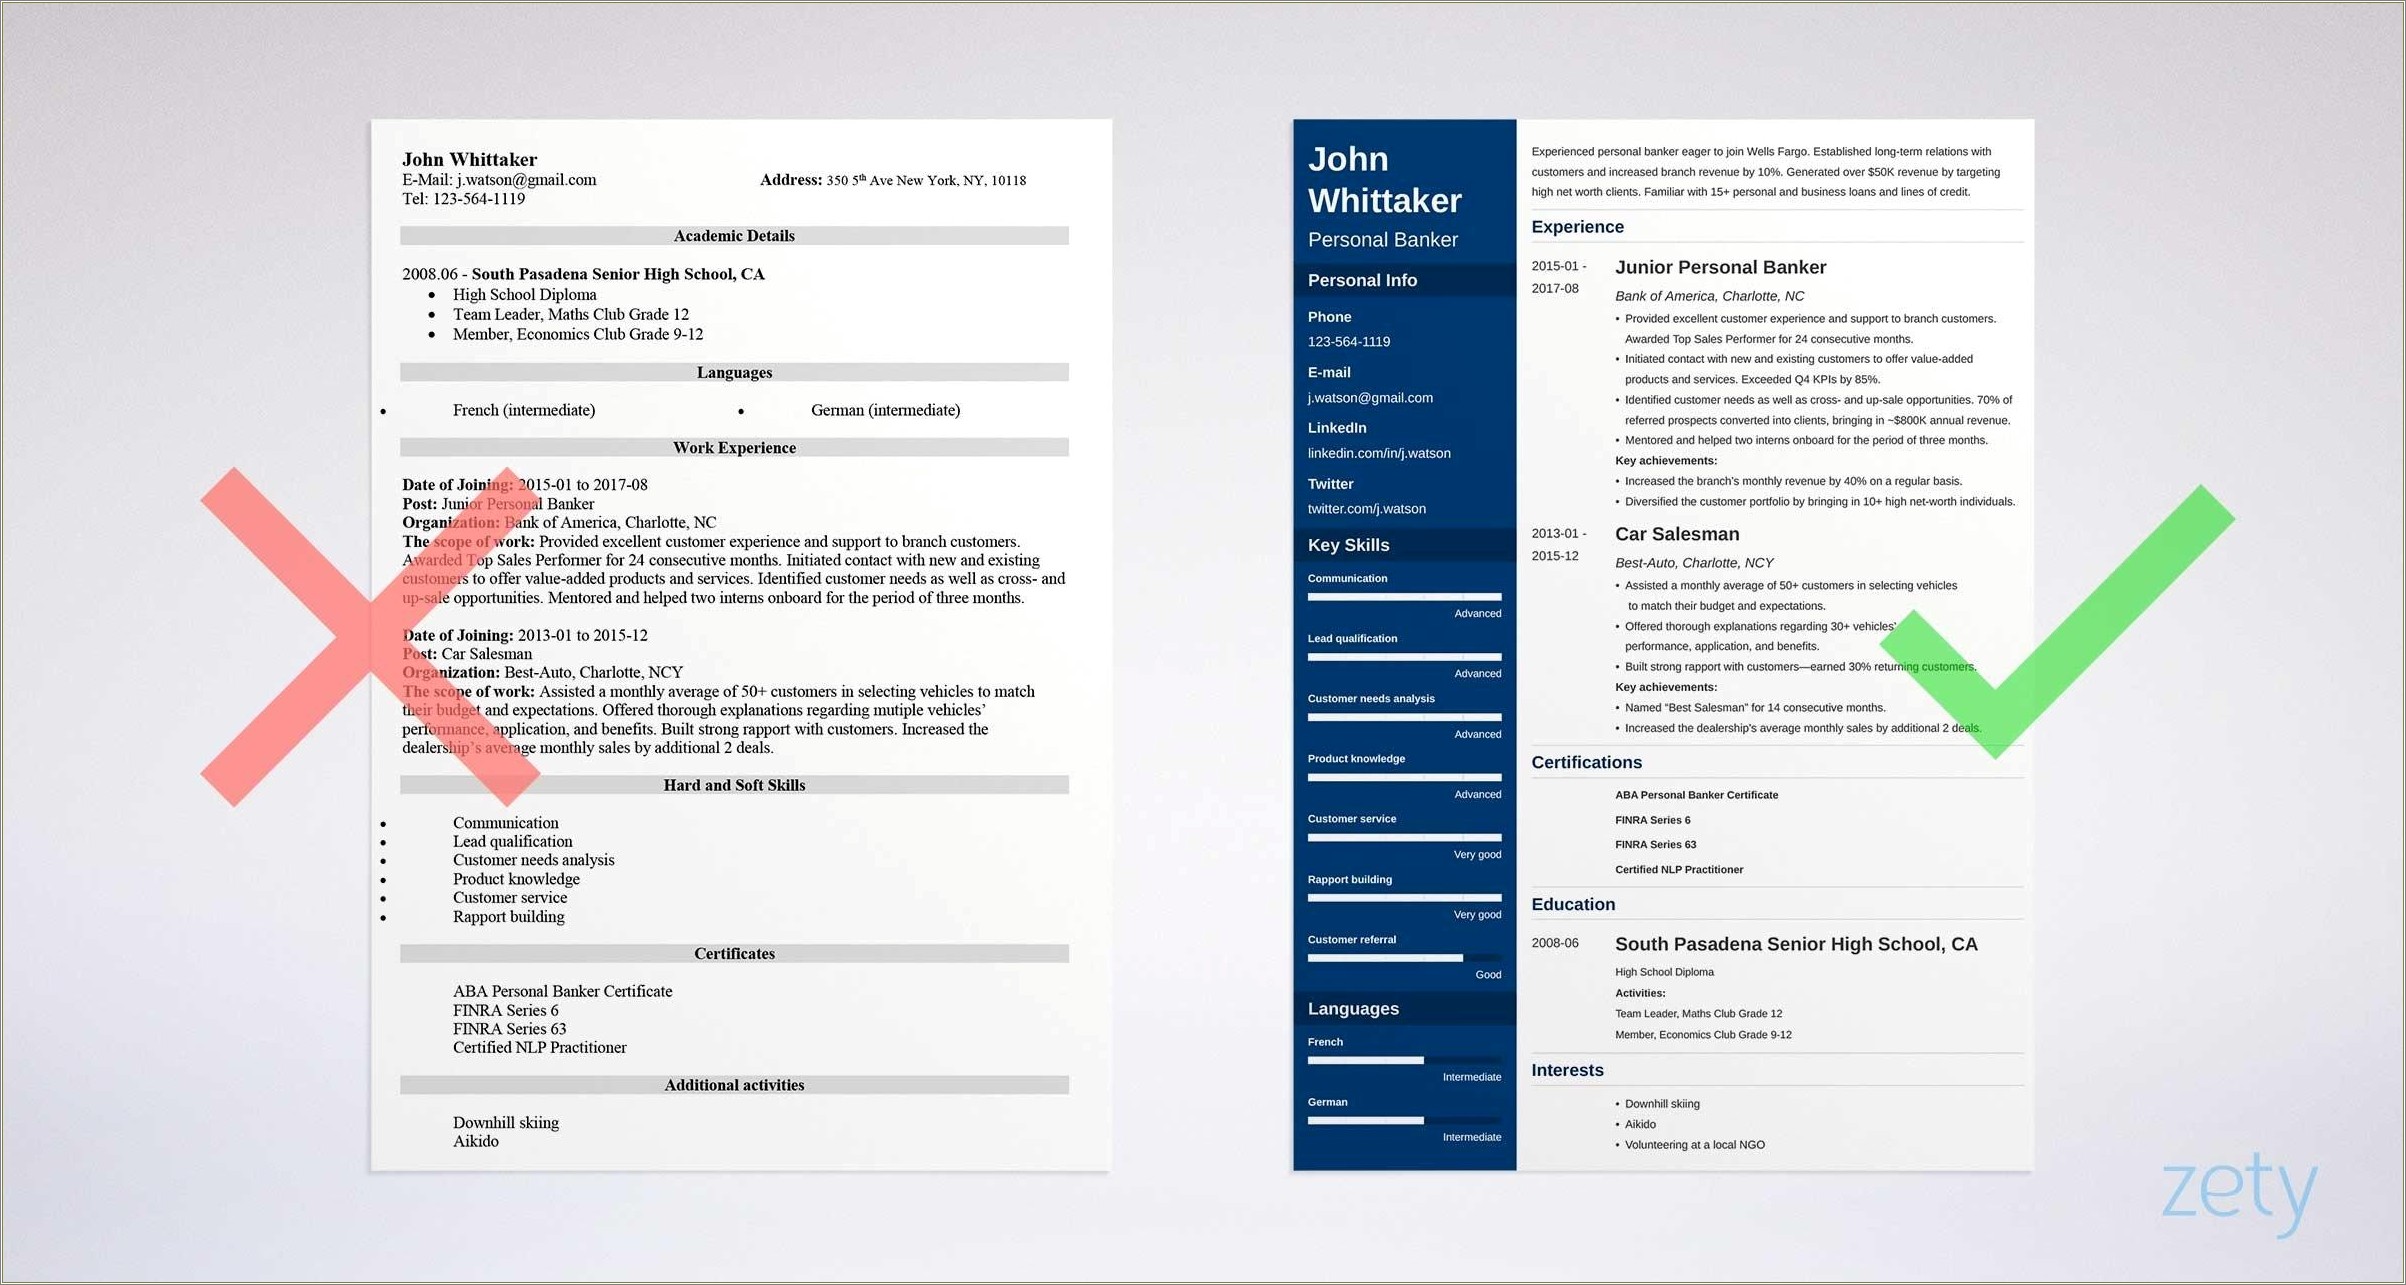 Do Finra Licenses Look Good On Resume